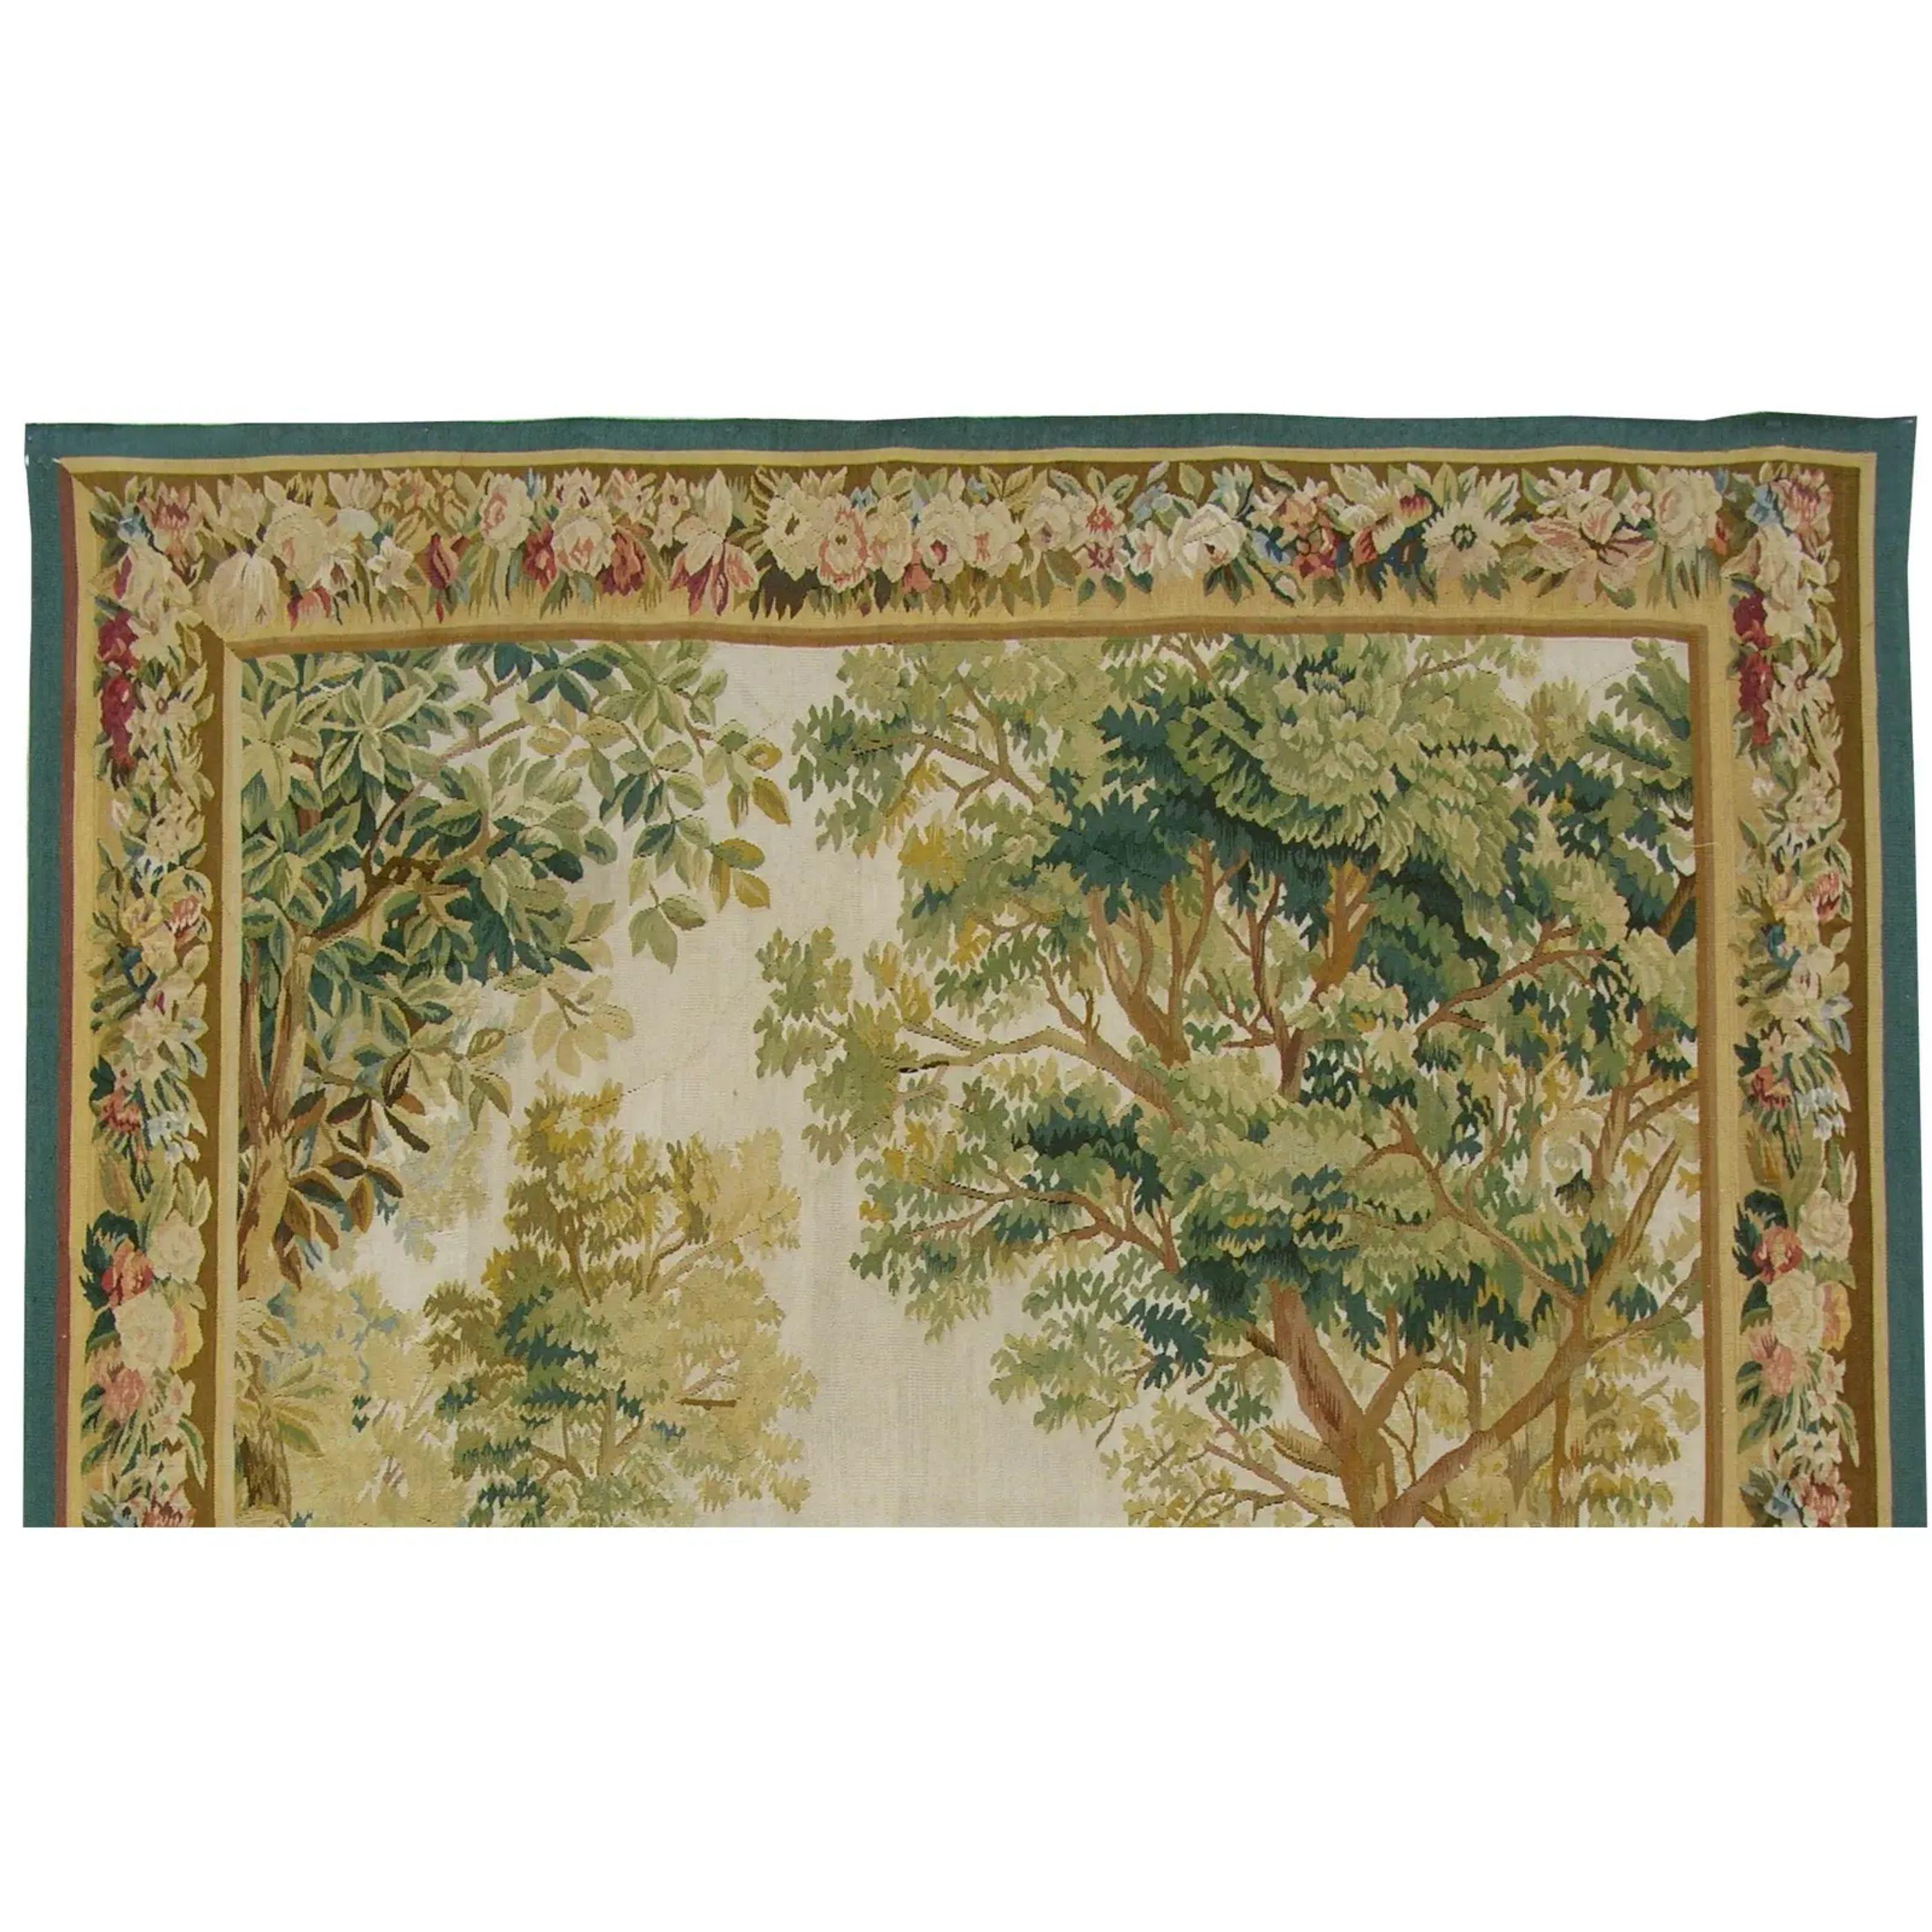 Empire Vintage Woven Outdoor Scene Tapestry 6.25X5.0 For Sale